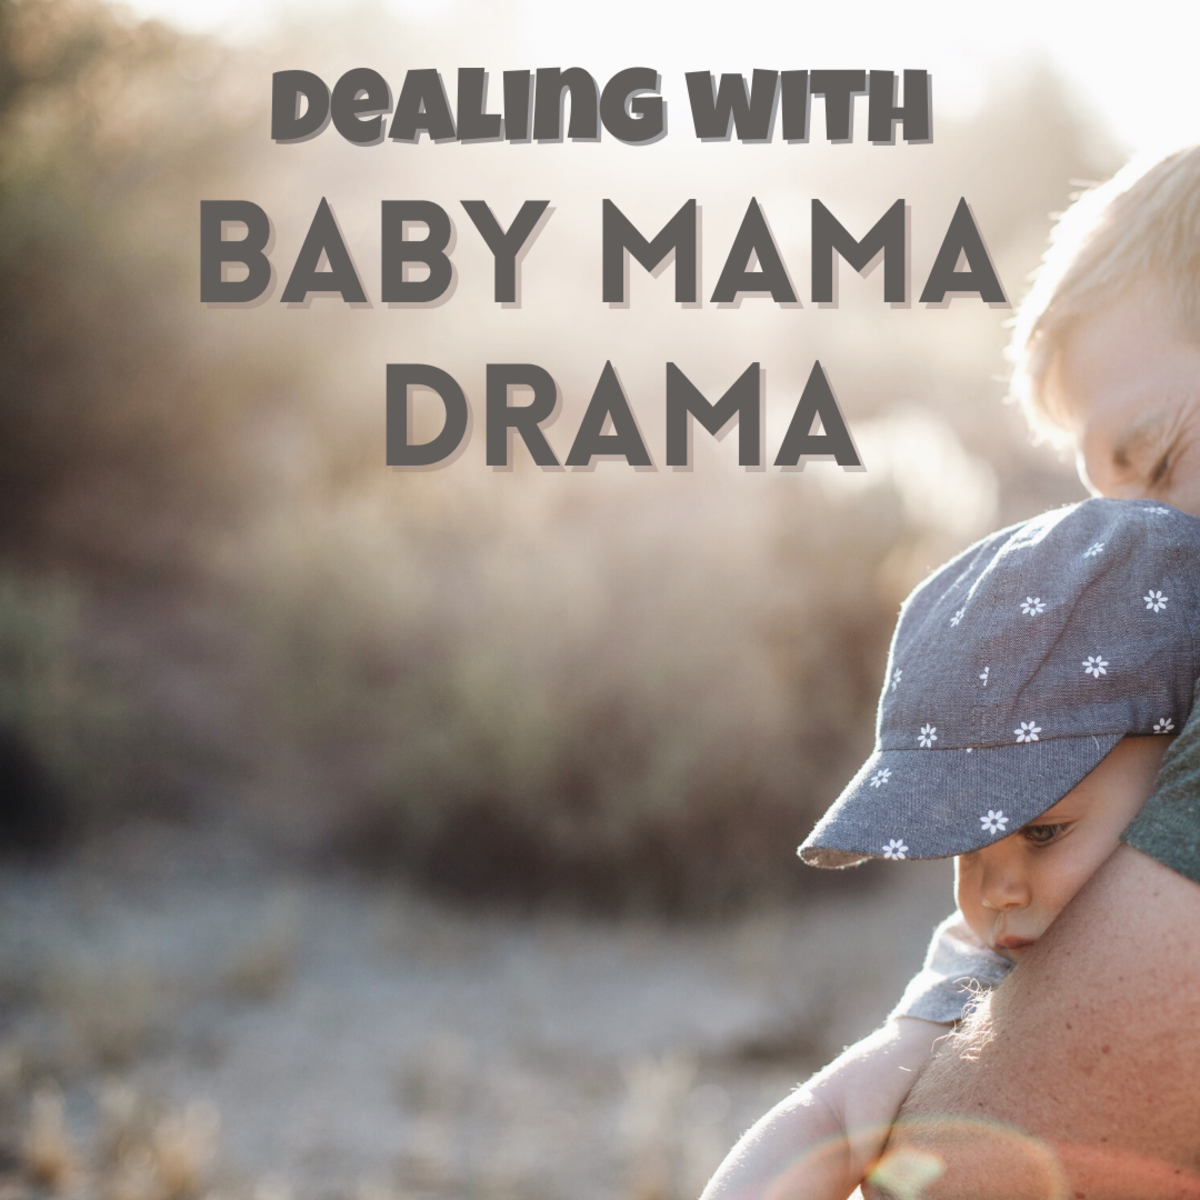 Are you dealing with some baby mama drama? Read on to find out how to deal with it.